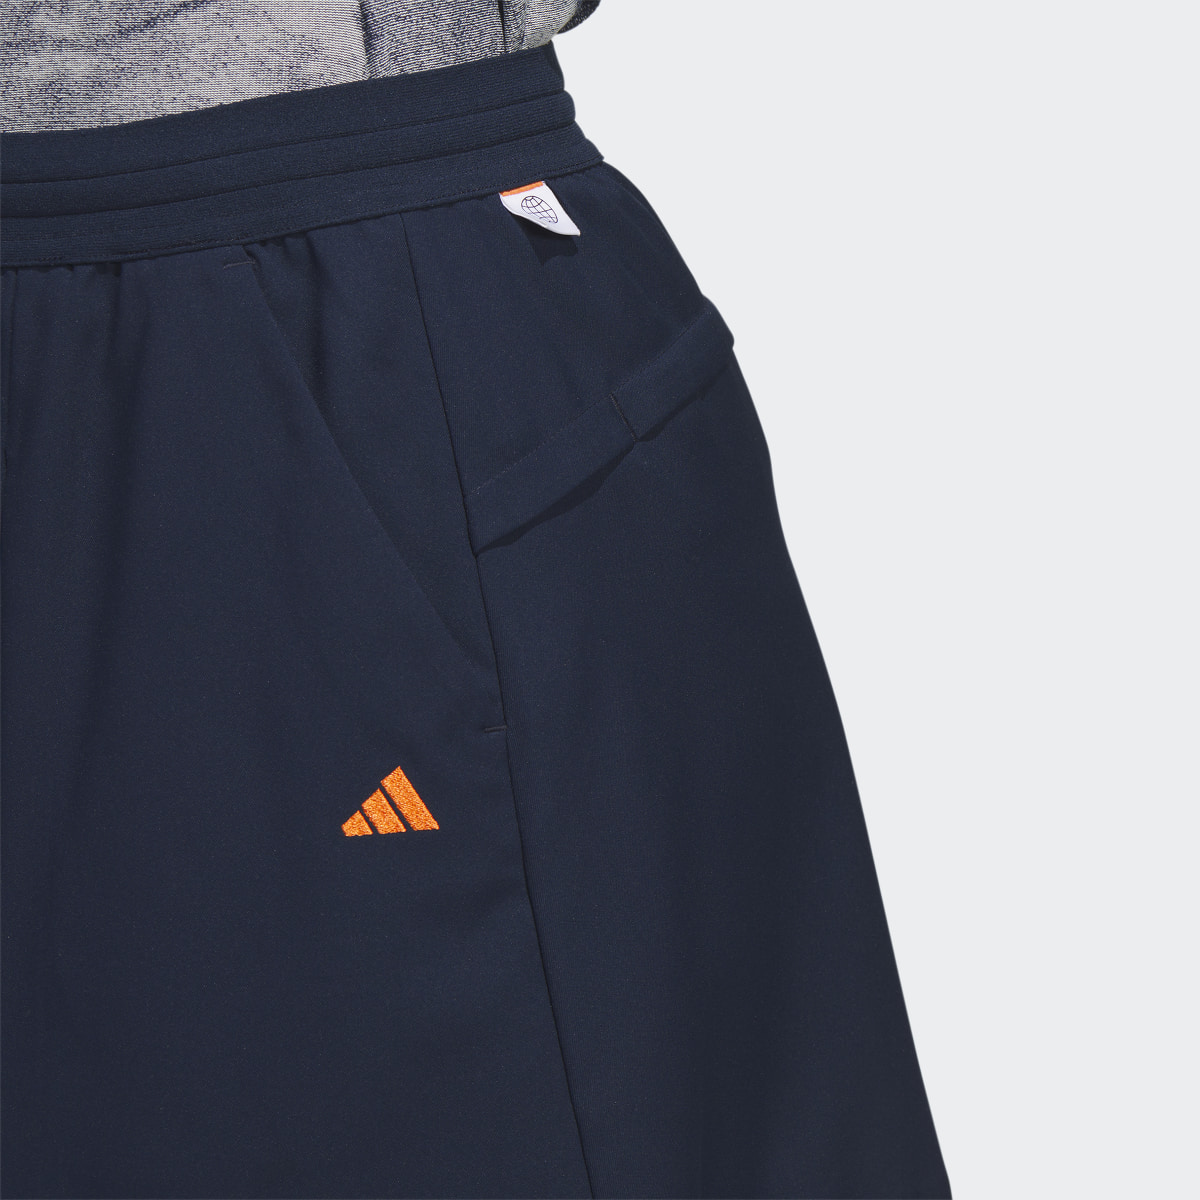 Adidas Made To Be Remade Flare Skirt. 6